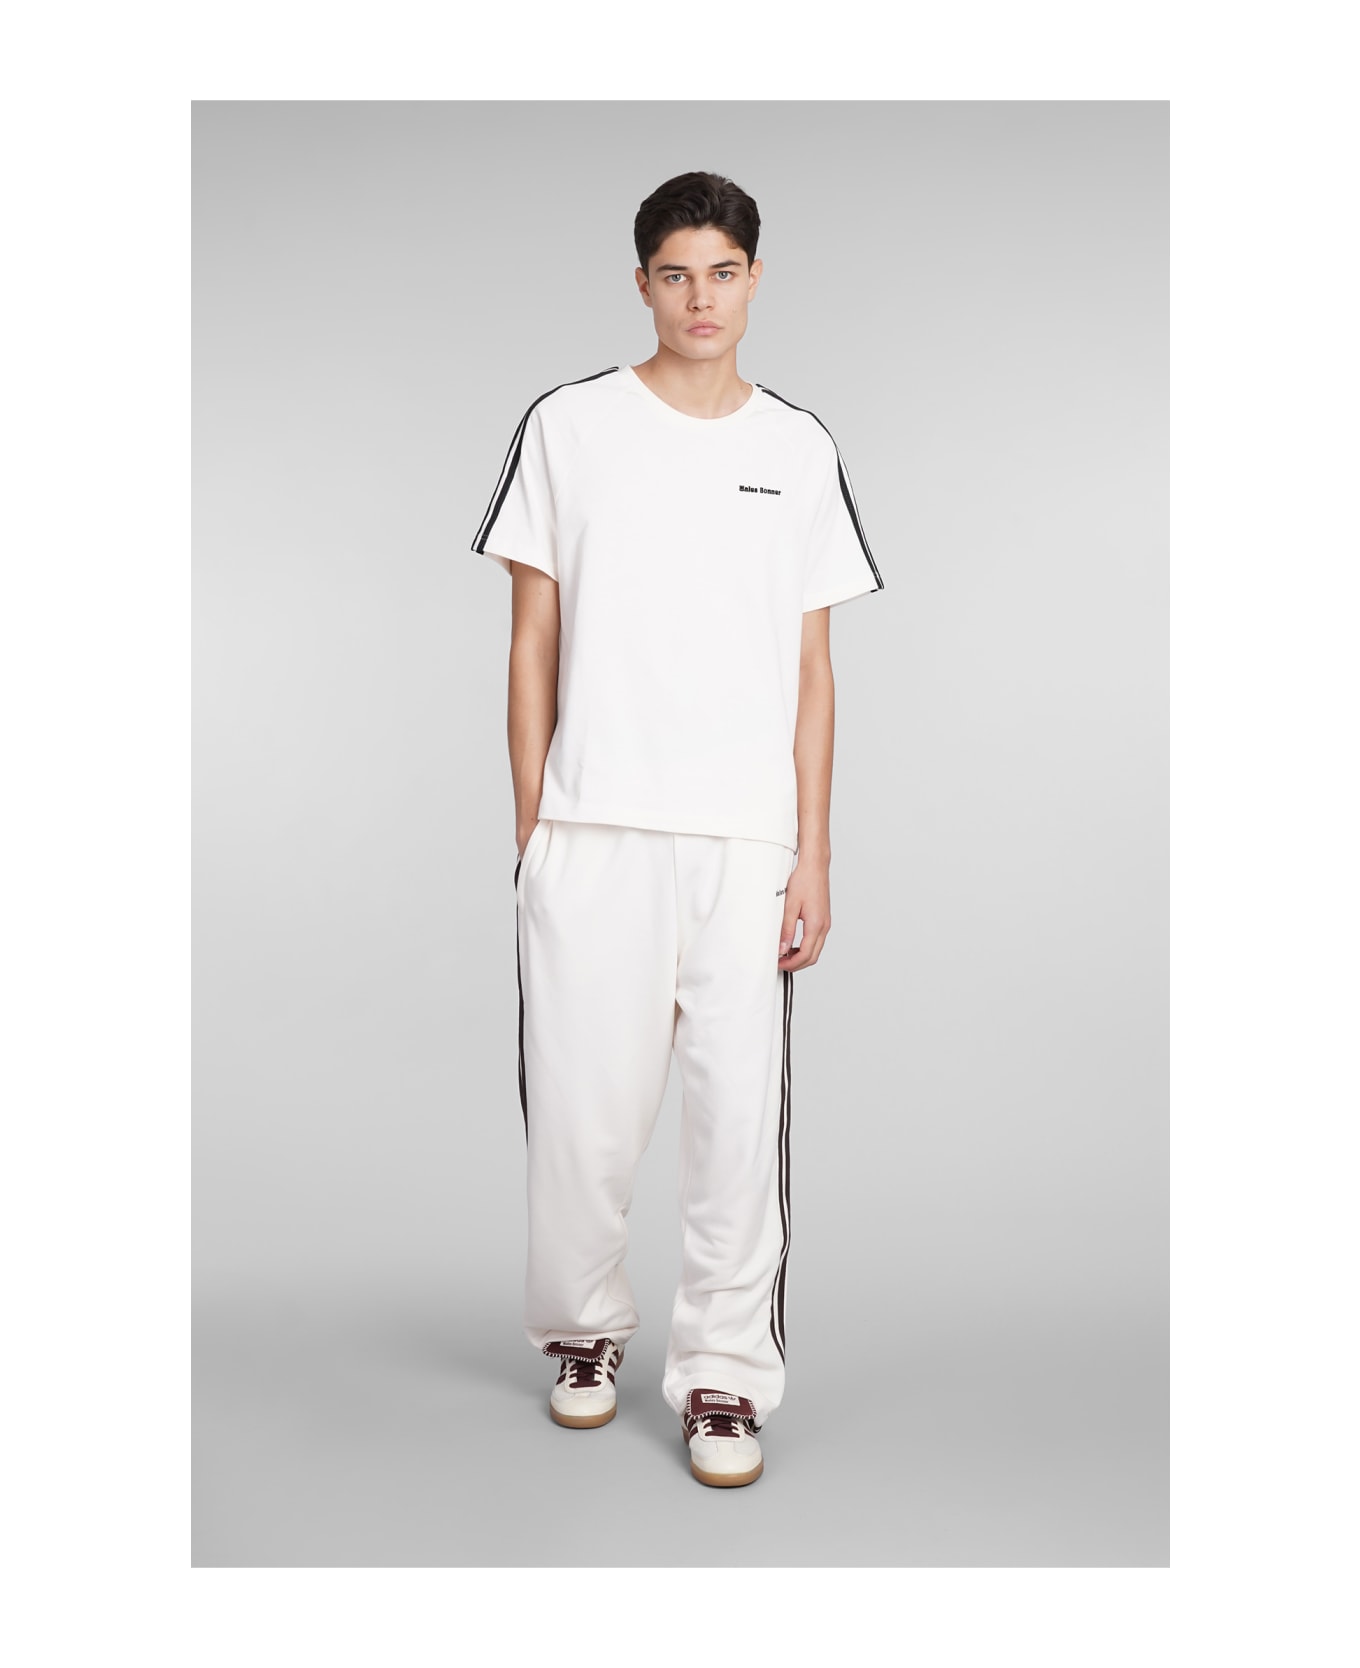 Adidas Originals by Wales Bonner T-shirt In White Cotton - white